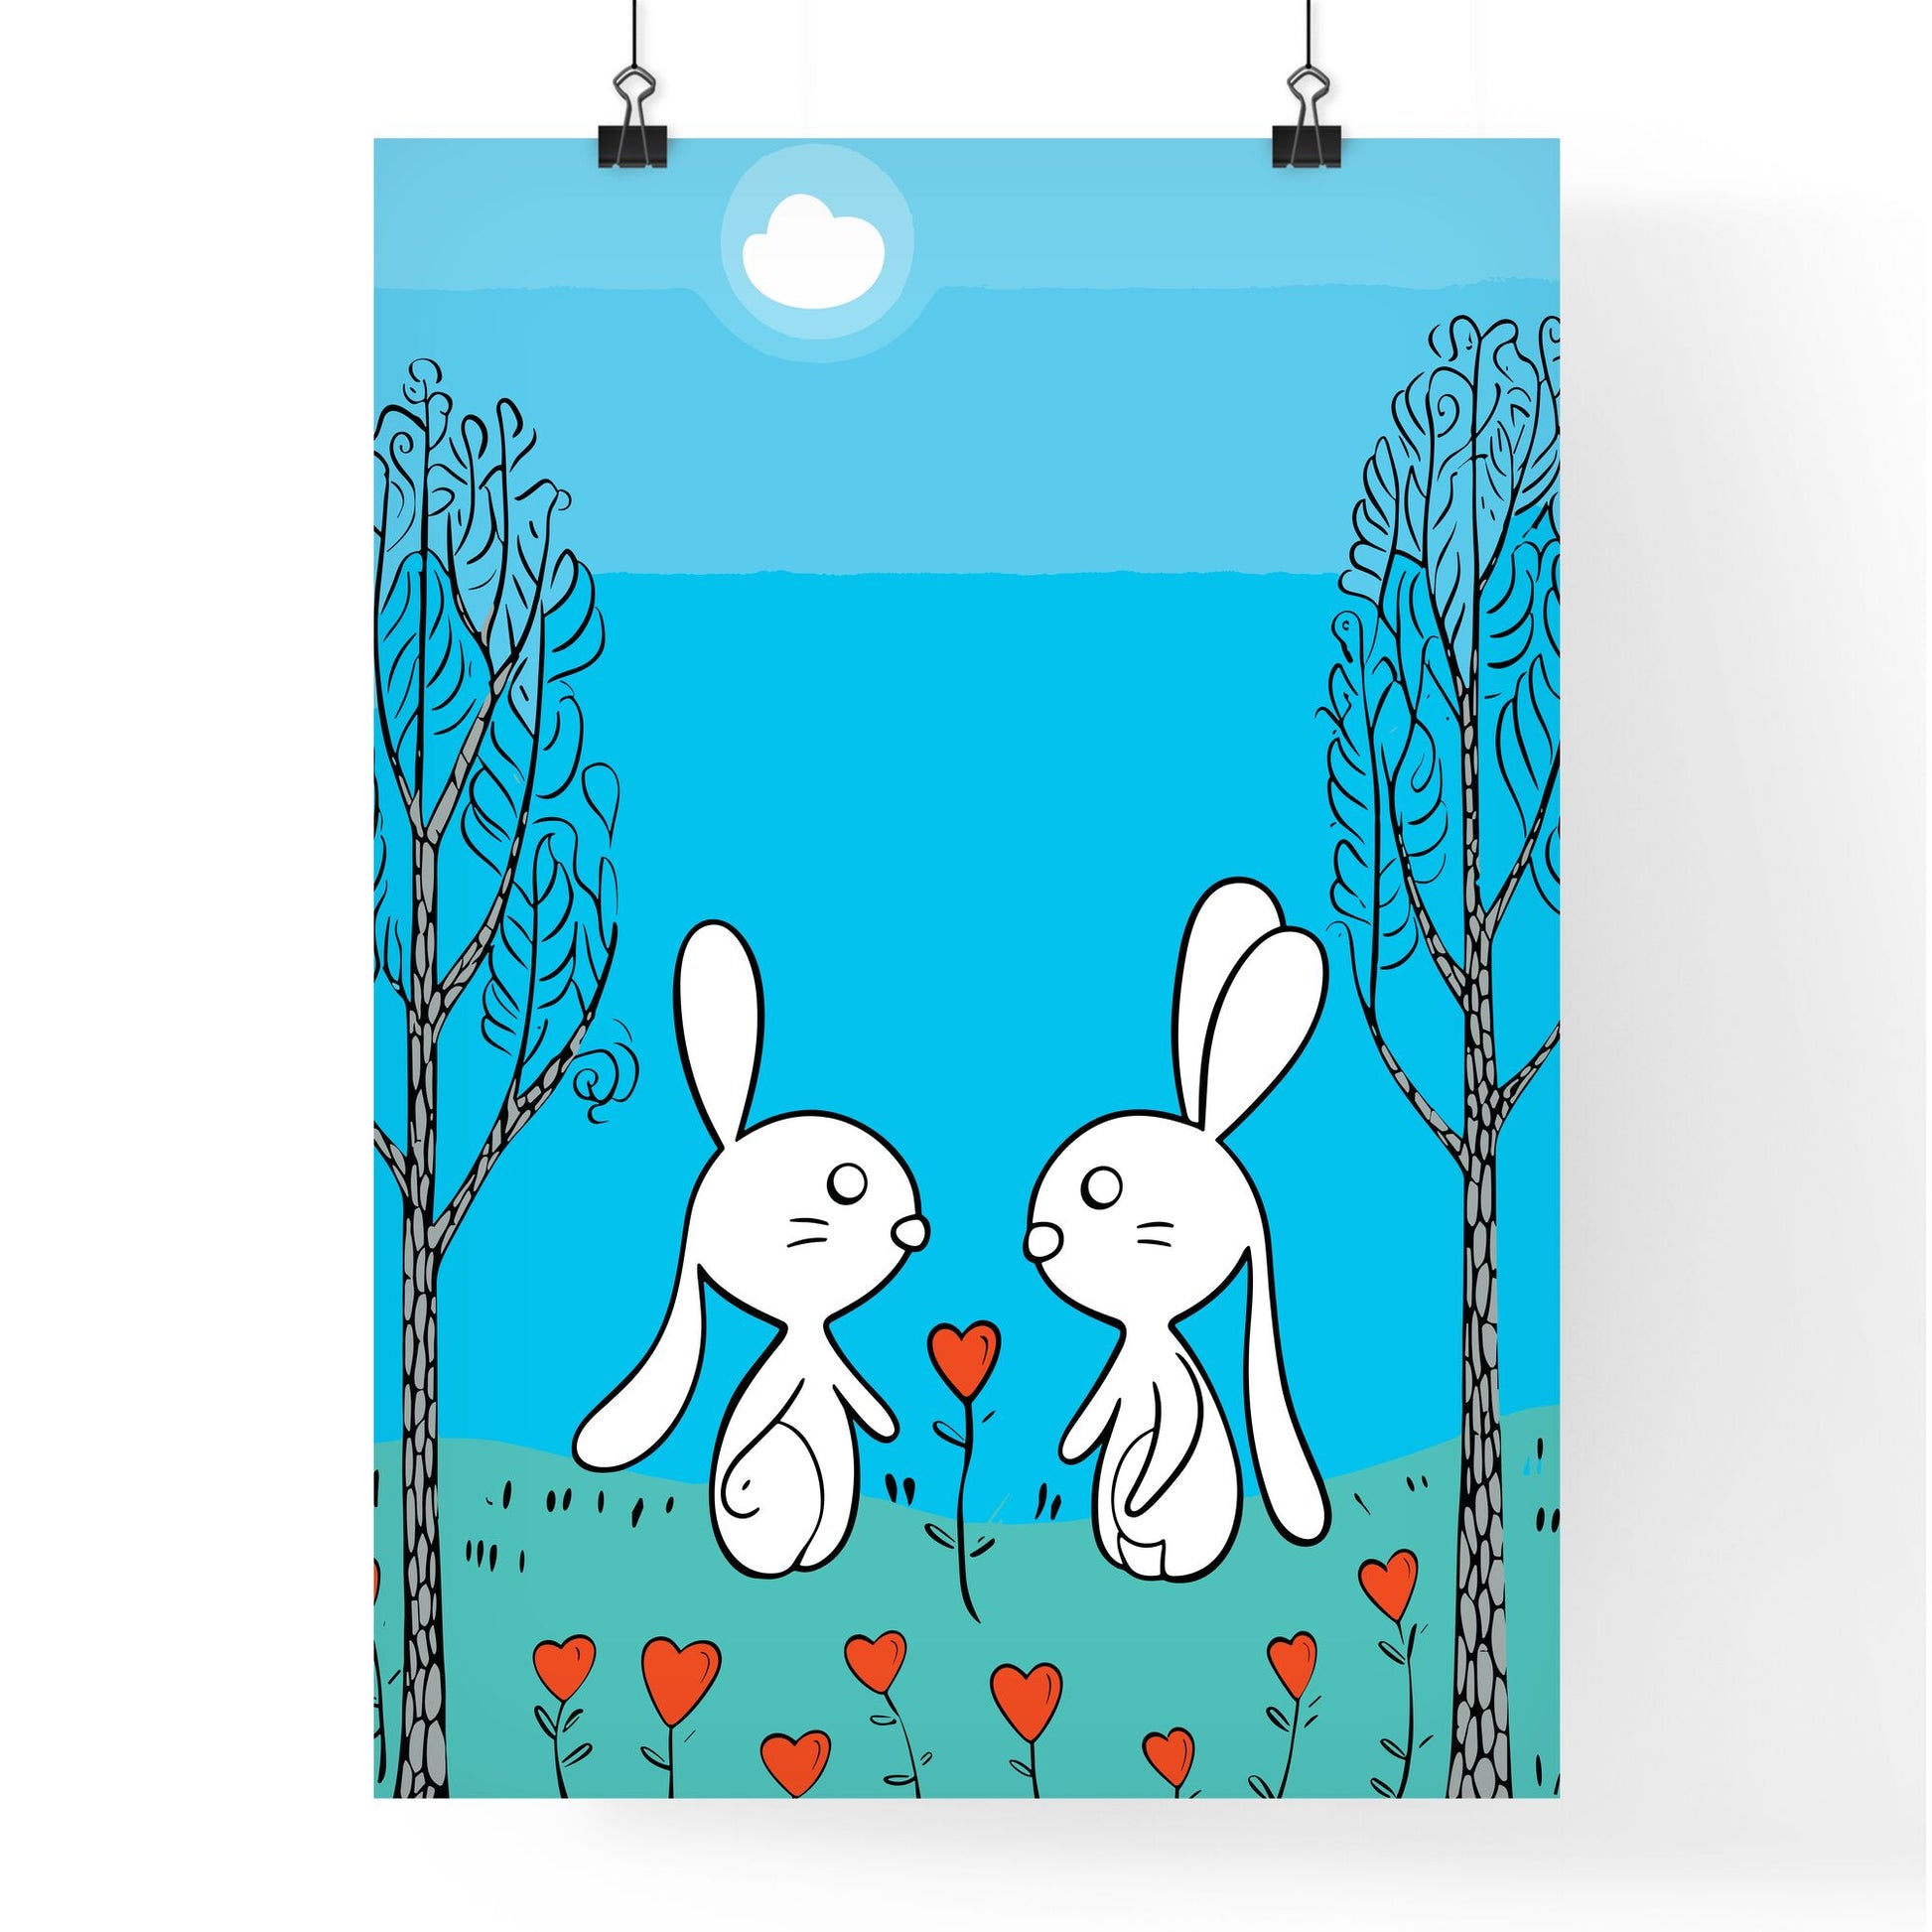 Cute Cute Bunnies In Love - A Cartoon Of Two Bunnies In A Field With Trees And A Heart Default Title